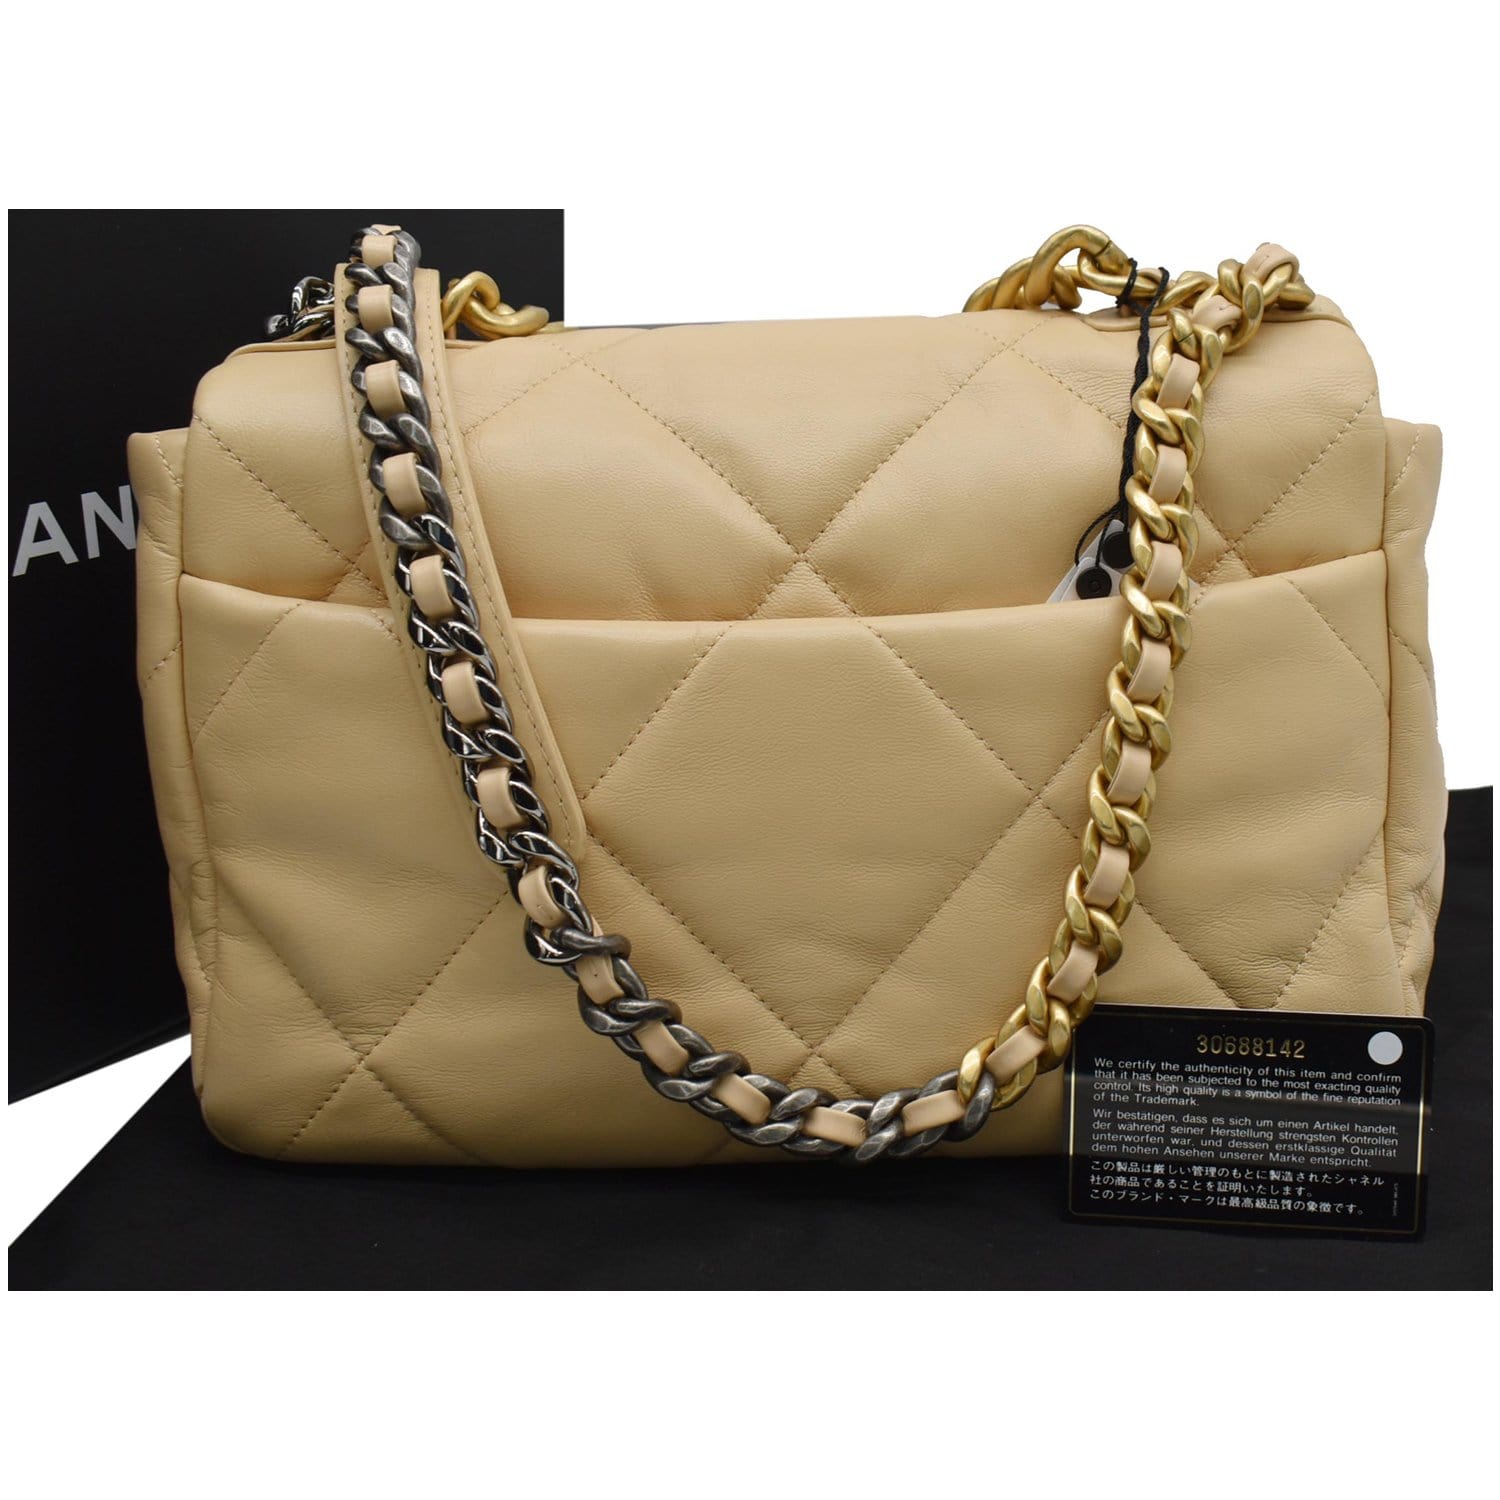 desert CHANEL 19 Large Lambskin Leather Shoulder Bag Nude - desert chanel  and farfetch to roll out boutique of tomorrow - 10% OFF